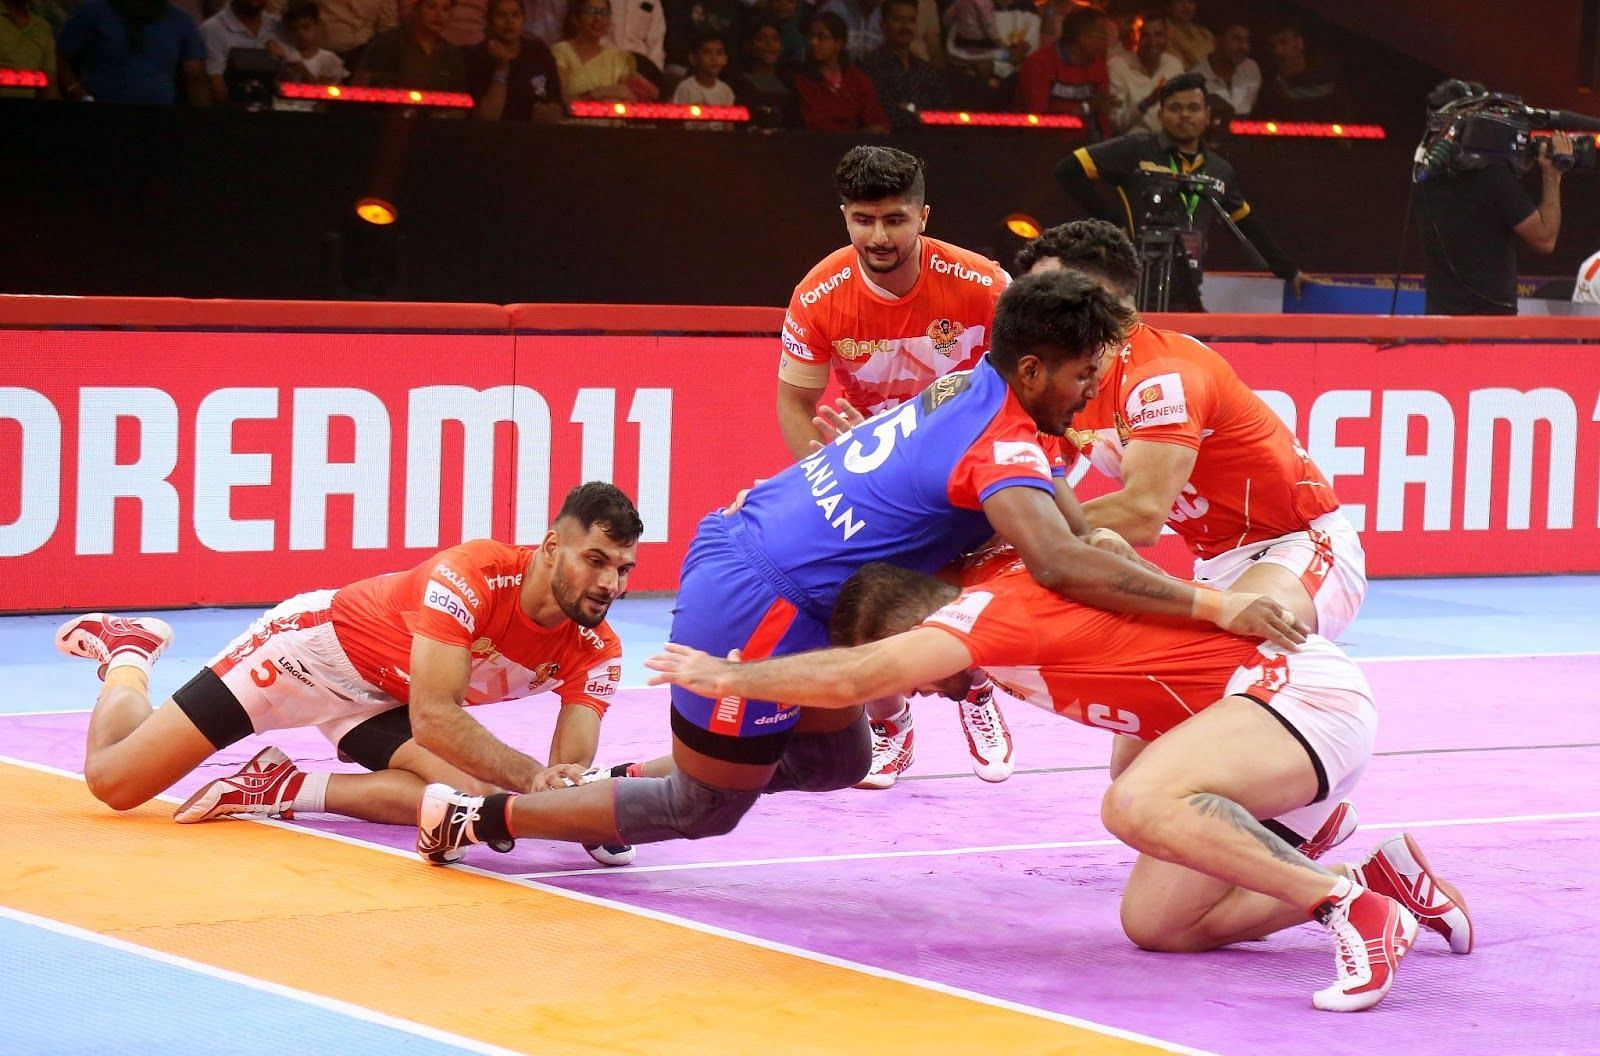 Sombir (left) of Gujarat Giants with an ankle-hold (Credits: PKL)